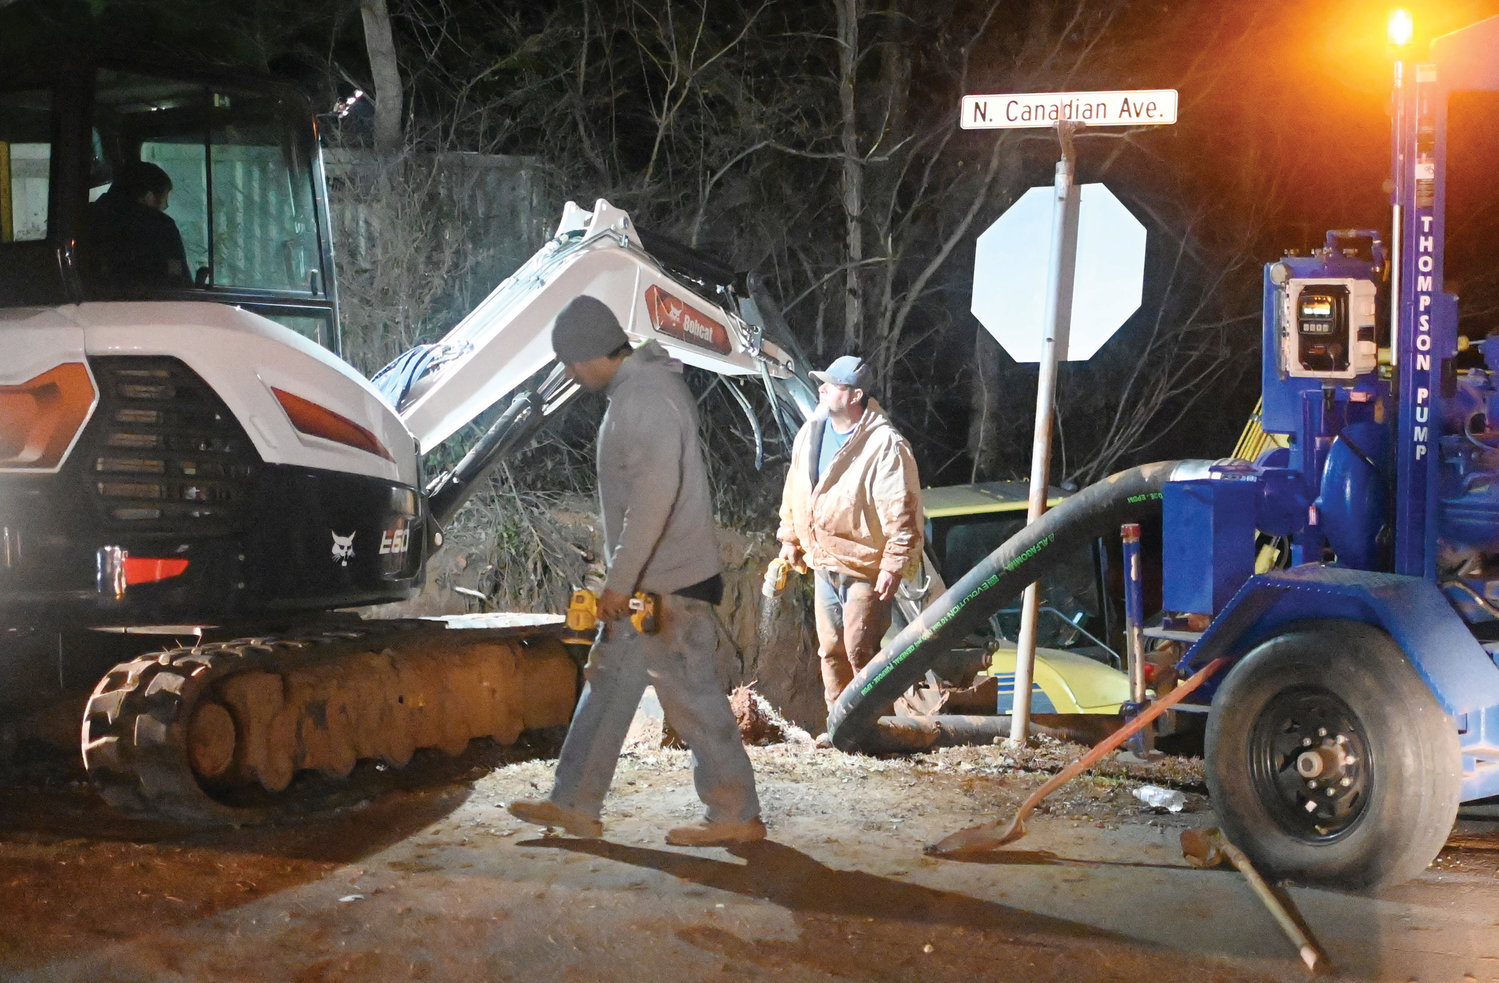 The main water line from the wells in Lexington sustained a major break at the corner of Canadian and Adams January 14 with water service cut off to the entire town of Purcell. Some residents had water as early as 4 a.m. City officials said water pressure was fully restored to most all customers by Sunday afternoon.